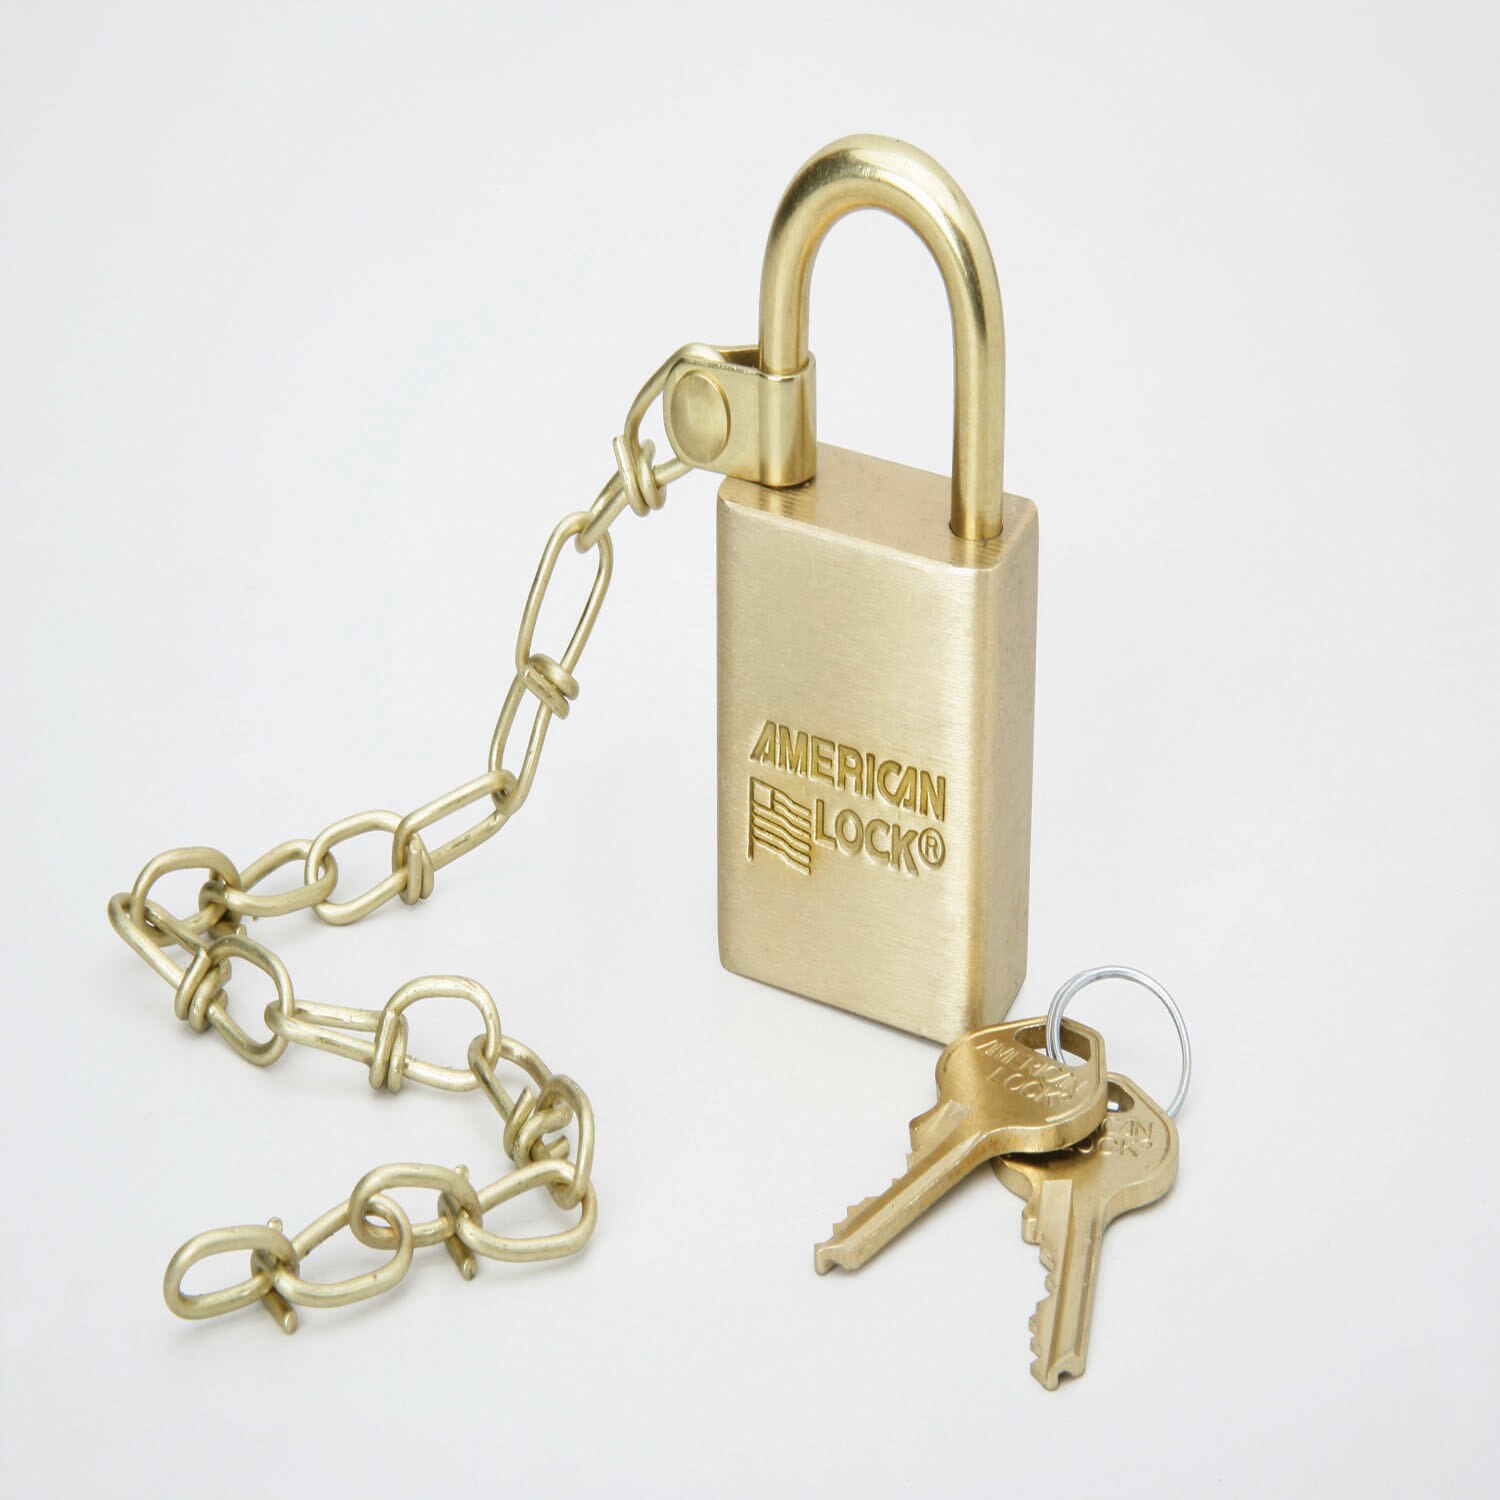 Padlock Set, Solid Case, 1.5" Wide Brass, Grand Master Keyed, w/Chain, 30/SE, 15-5-10L Groupings